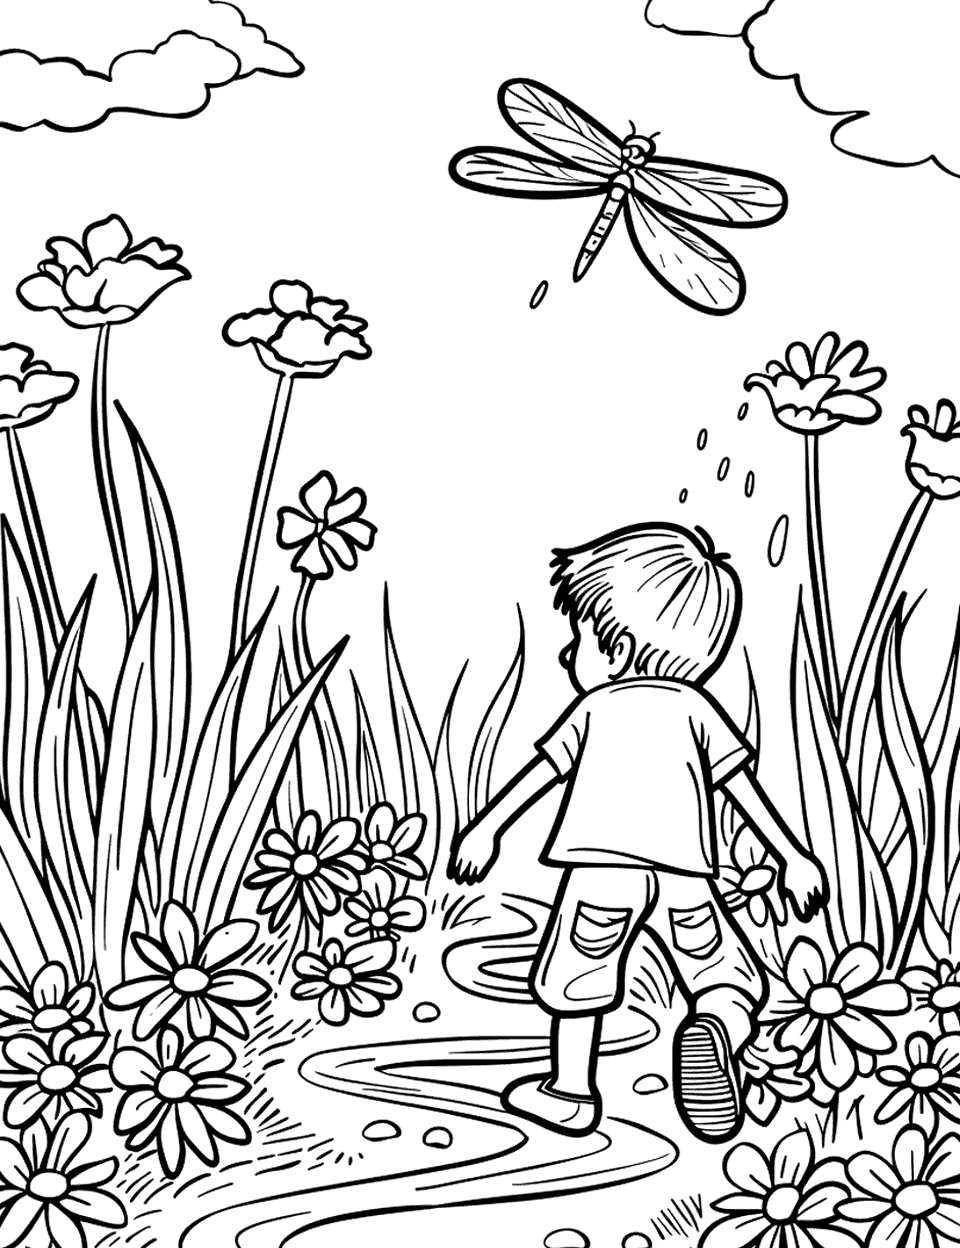 Chasing a Dragonfly Garden Coloring Page - A boy chasing a dragonfly across a garden with a small stream.